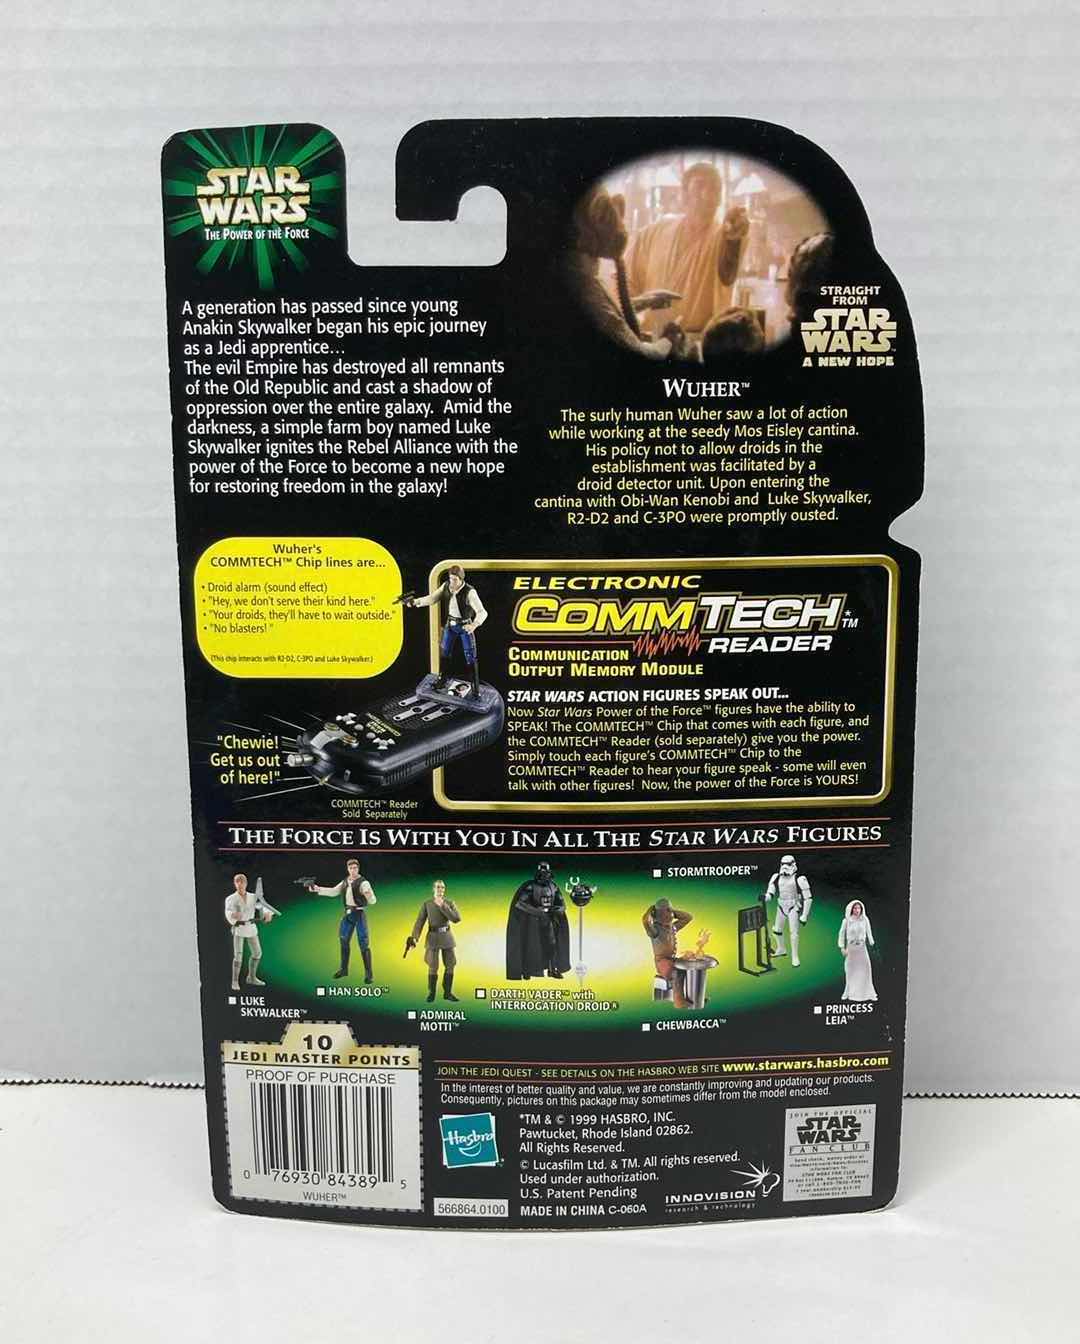 Photo 2 of NEW STAR WARS THE POWER OF THE FORCE ACTION FIGURE, WUHER W DROID DETECTOR UNIT & TALKING COMMTECH CHIP